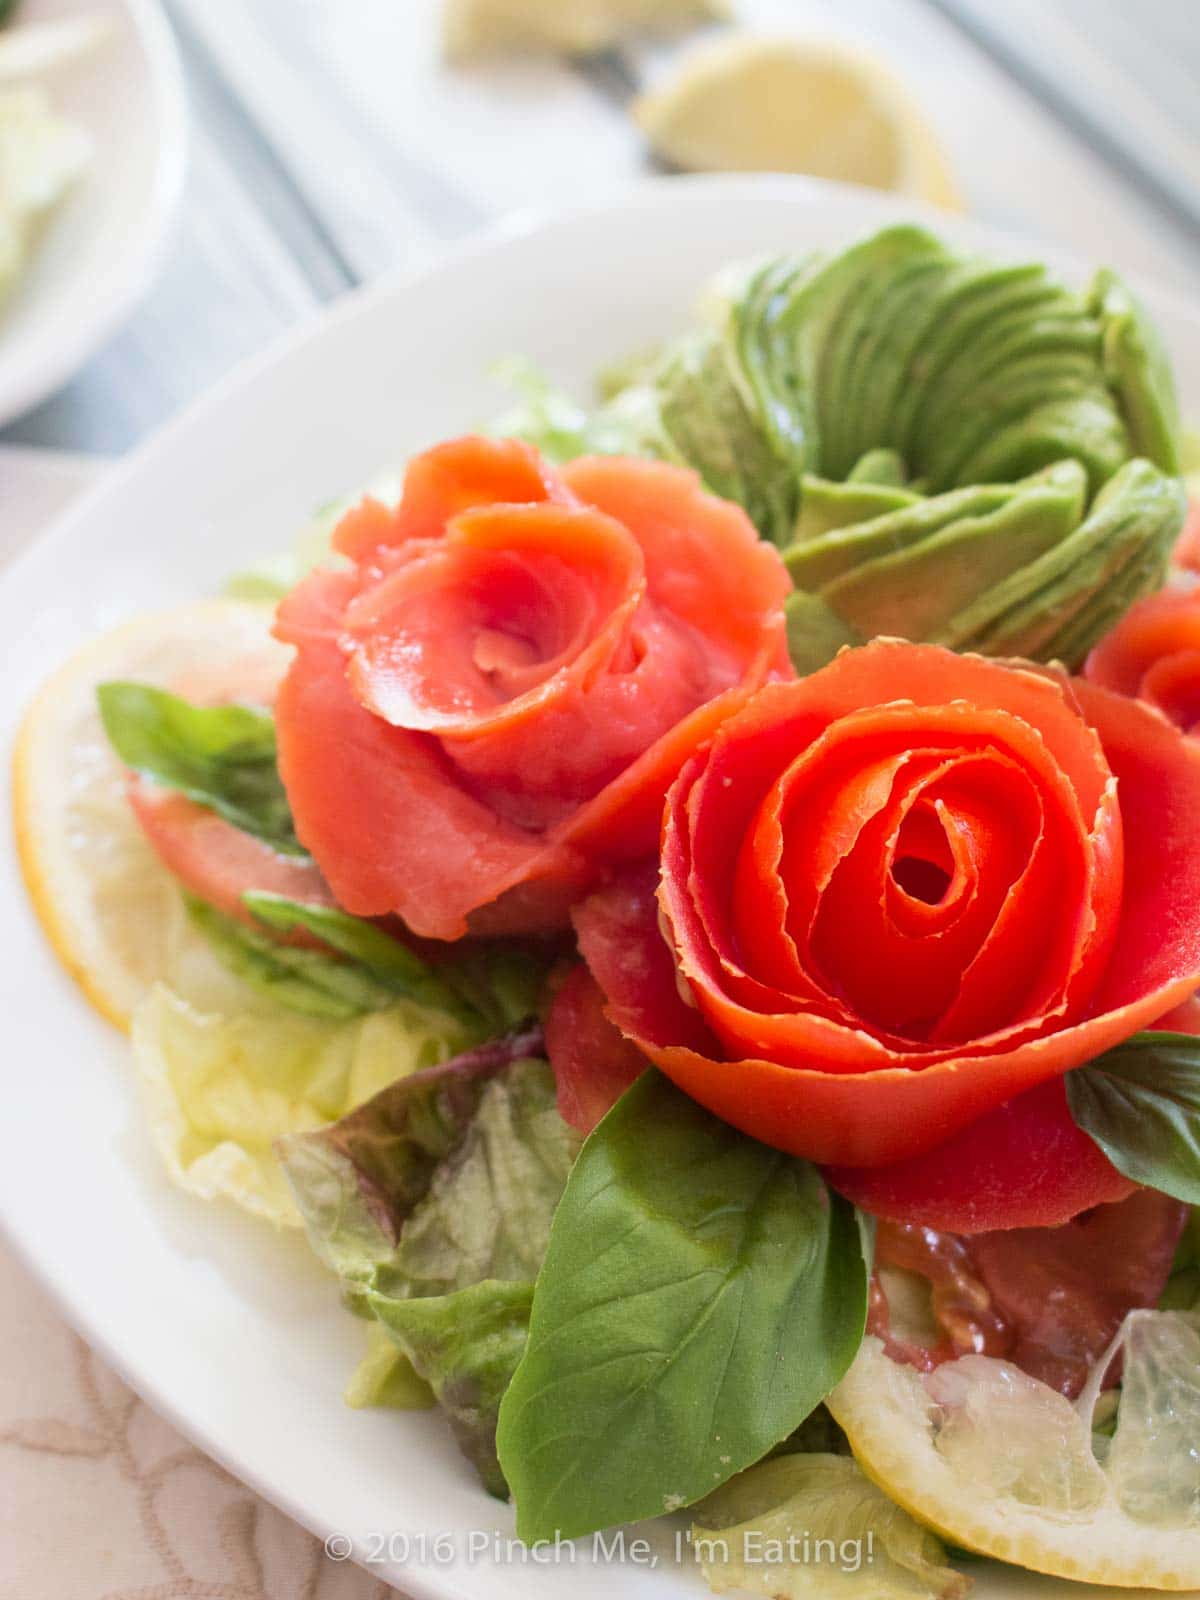 Smoked salmon, tomato, and avocado roses with salad on a white plate.